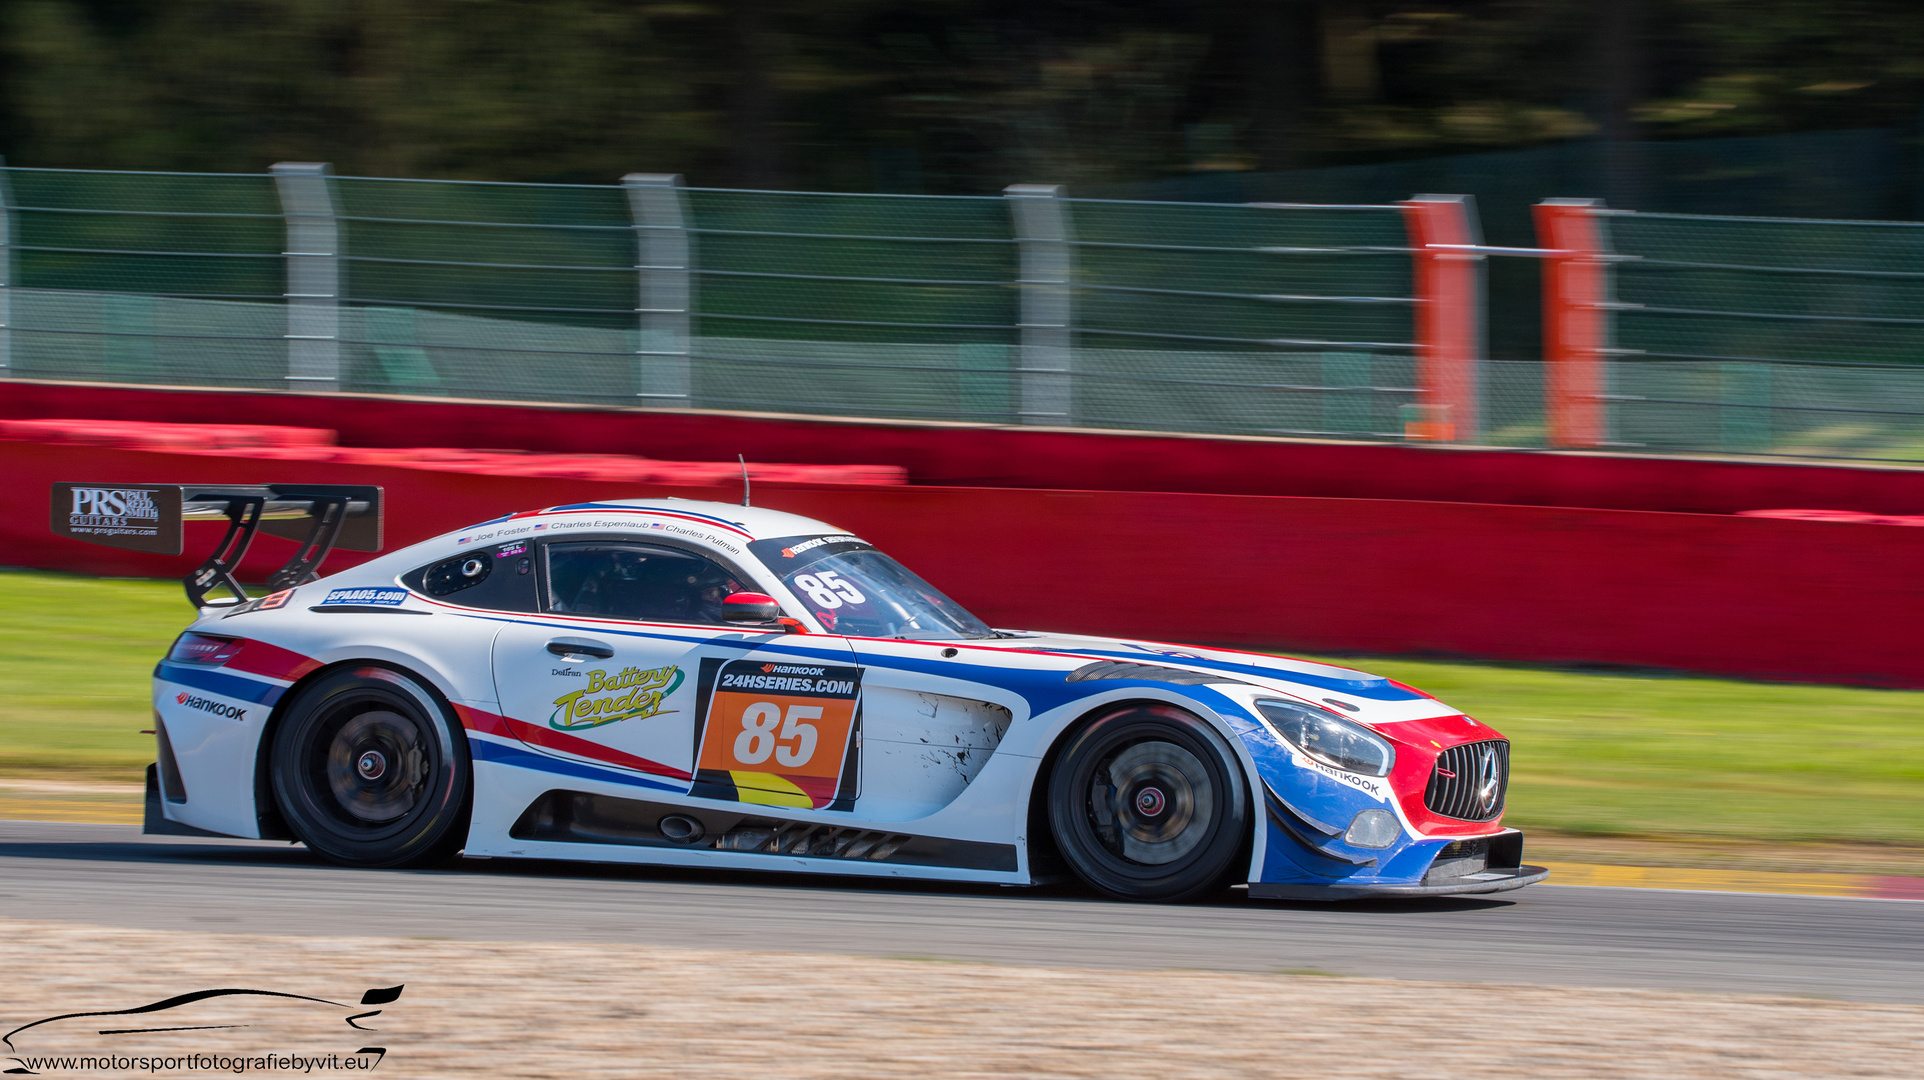 Mercedes-AMG GT3 on Race Track 2019 Part IV